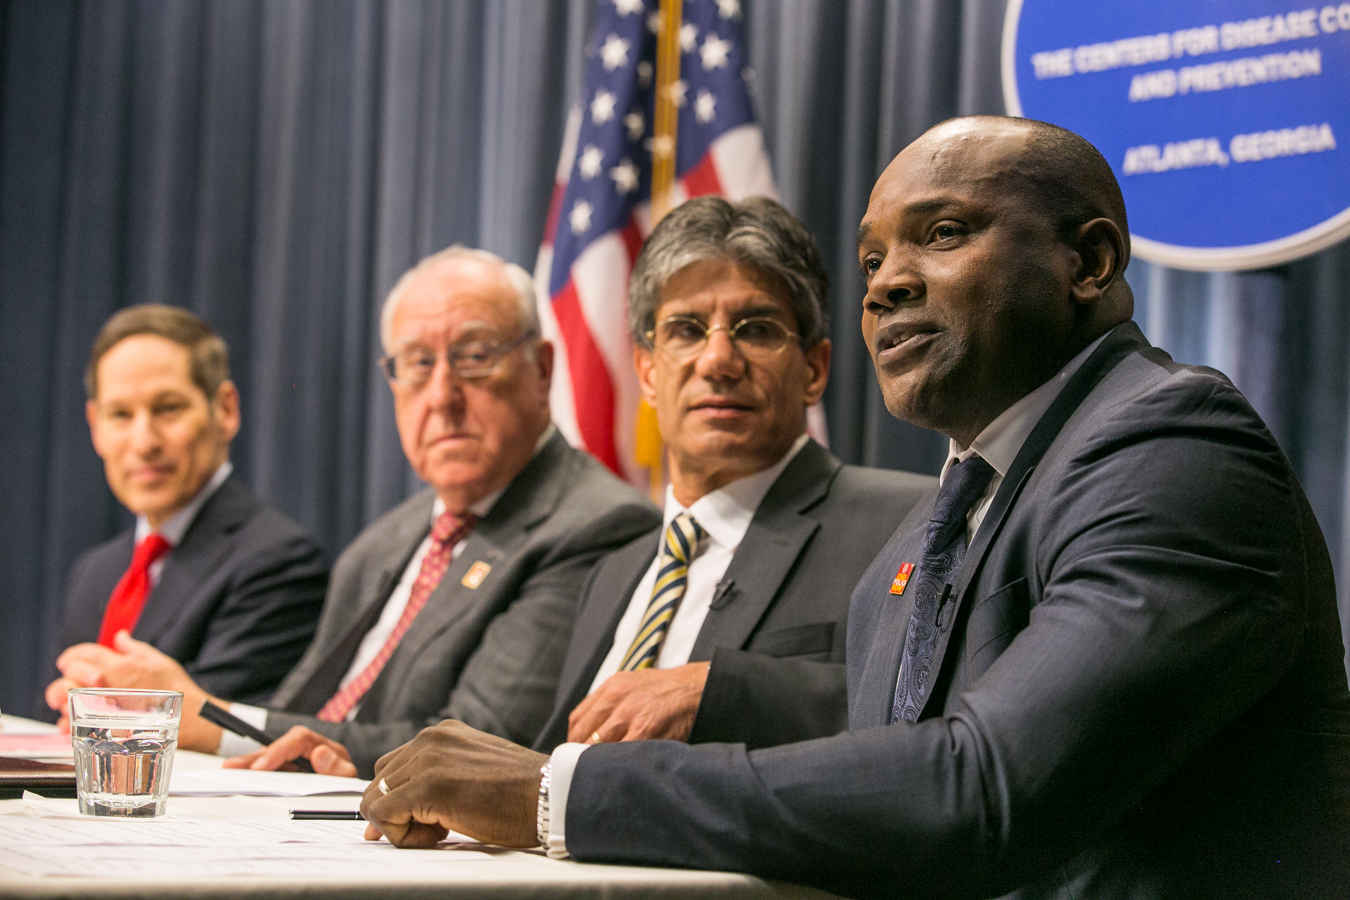 Dennis Ogbe, right, during a World Polio Day panel at the CDC (Alyce Henson&amp; © Rotary International)